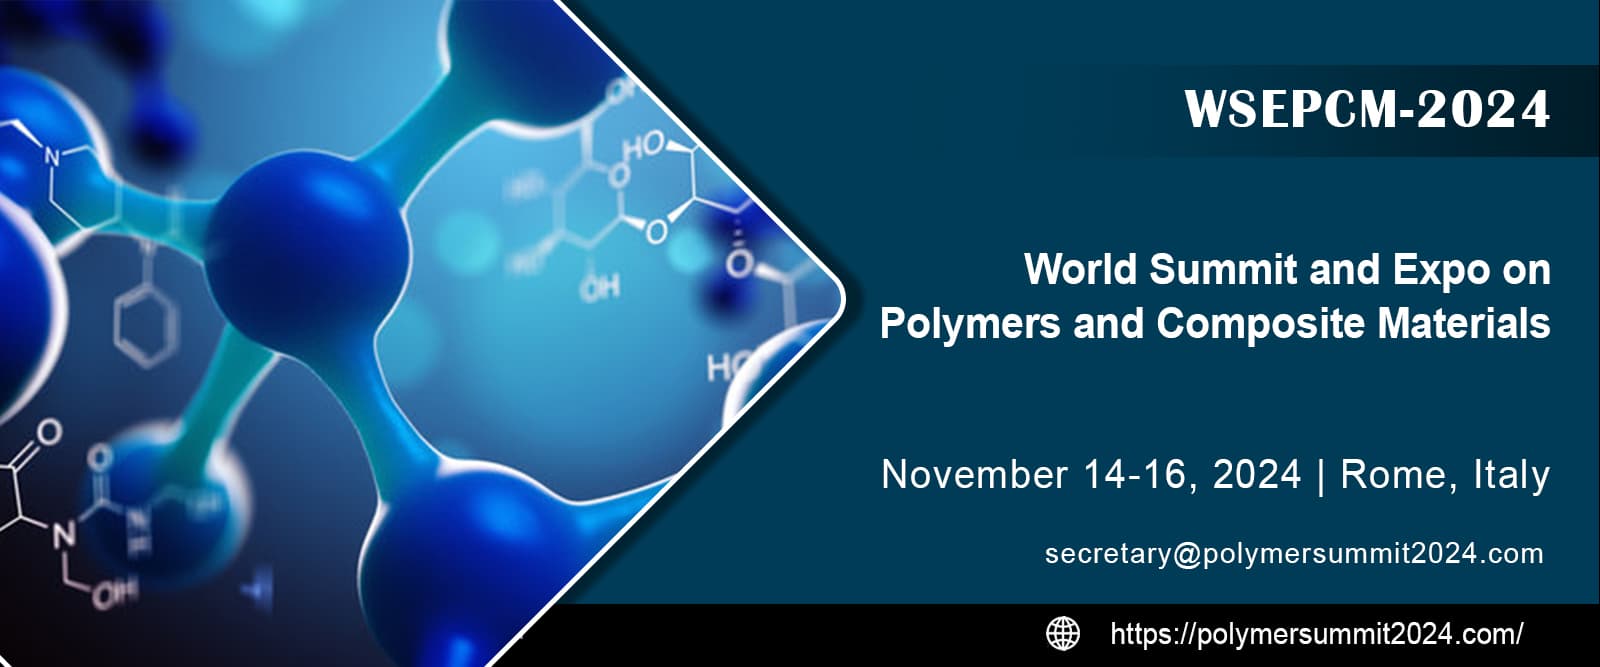 World Summit and Expo on Polymers and Composite Materials